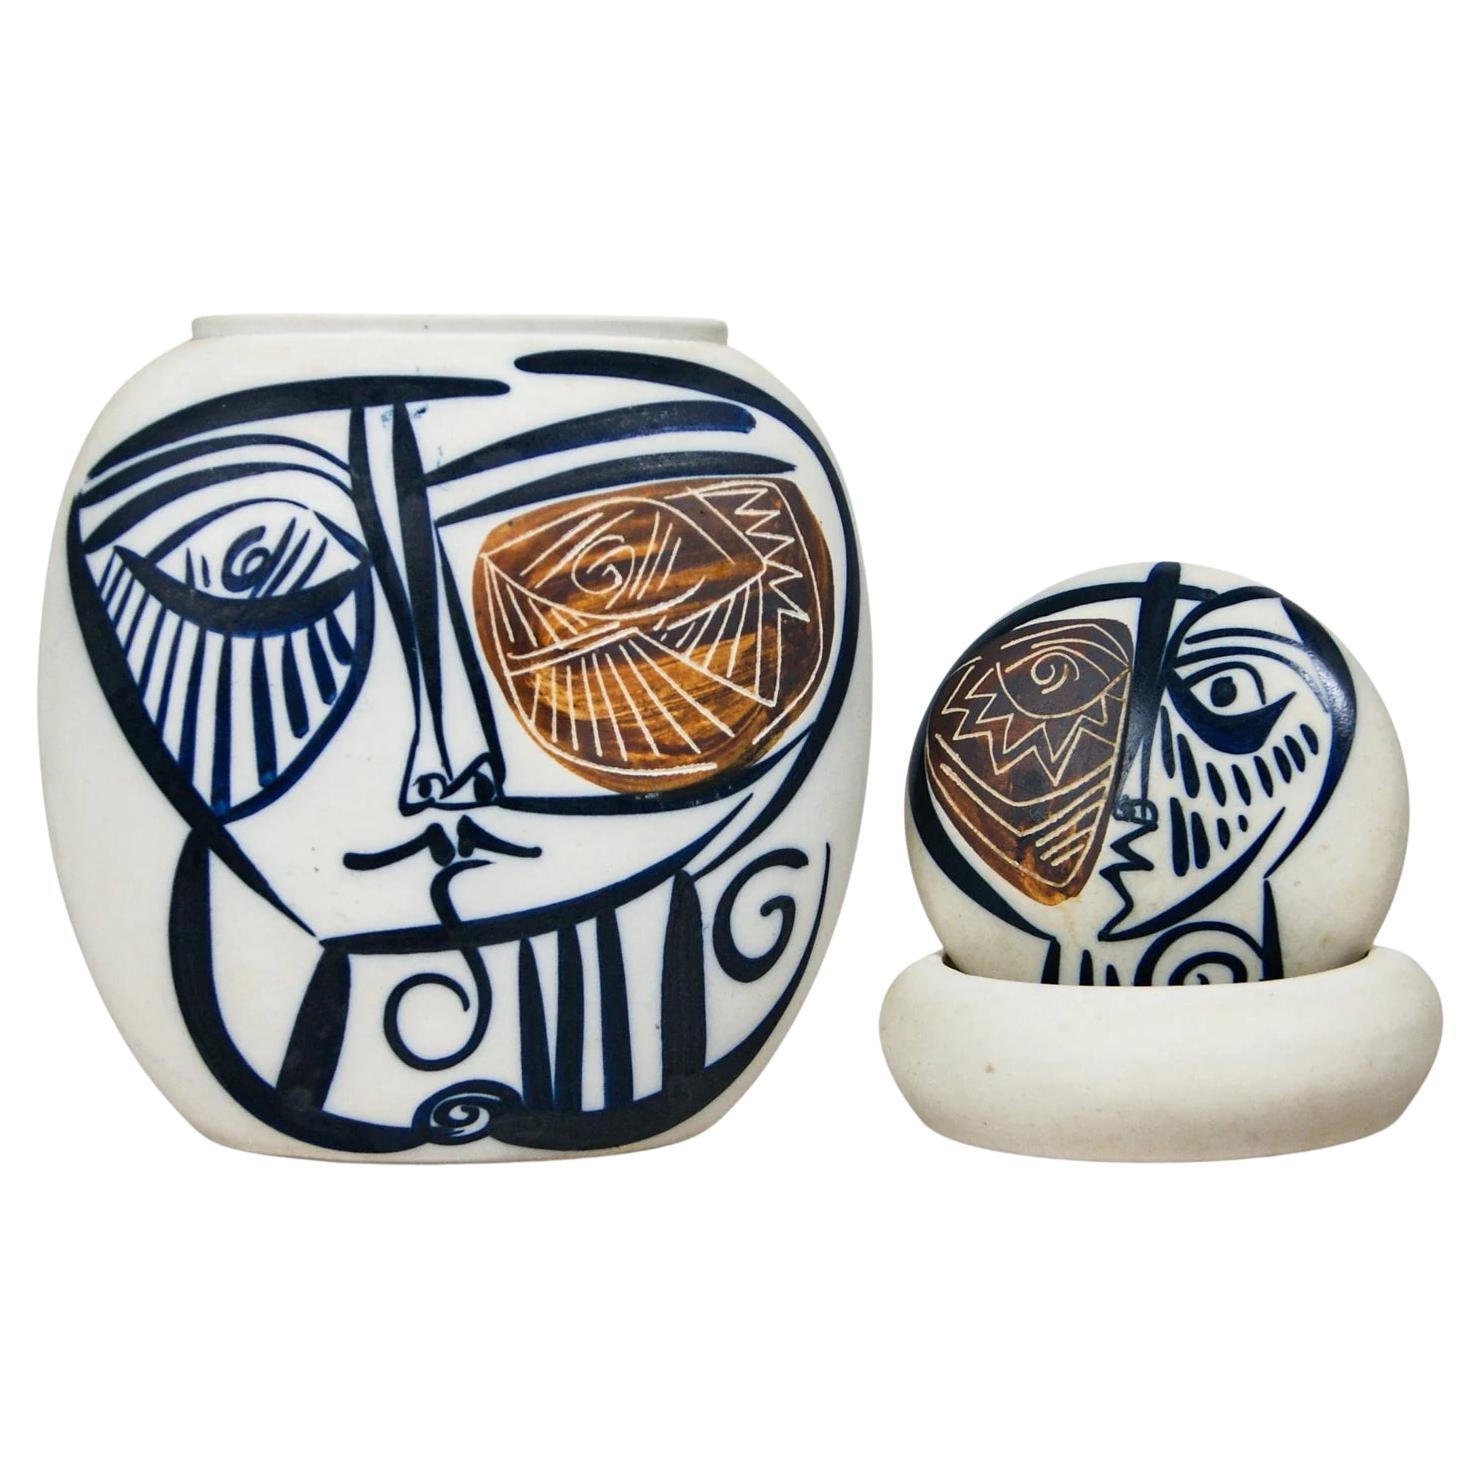 Vintage Spanish Porcelain Vase and Matching Bowl with Hand-Painted Cubist Faces For Sale